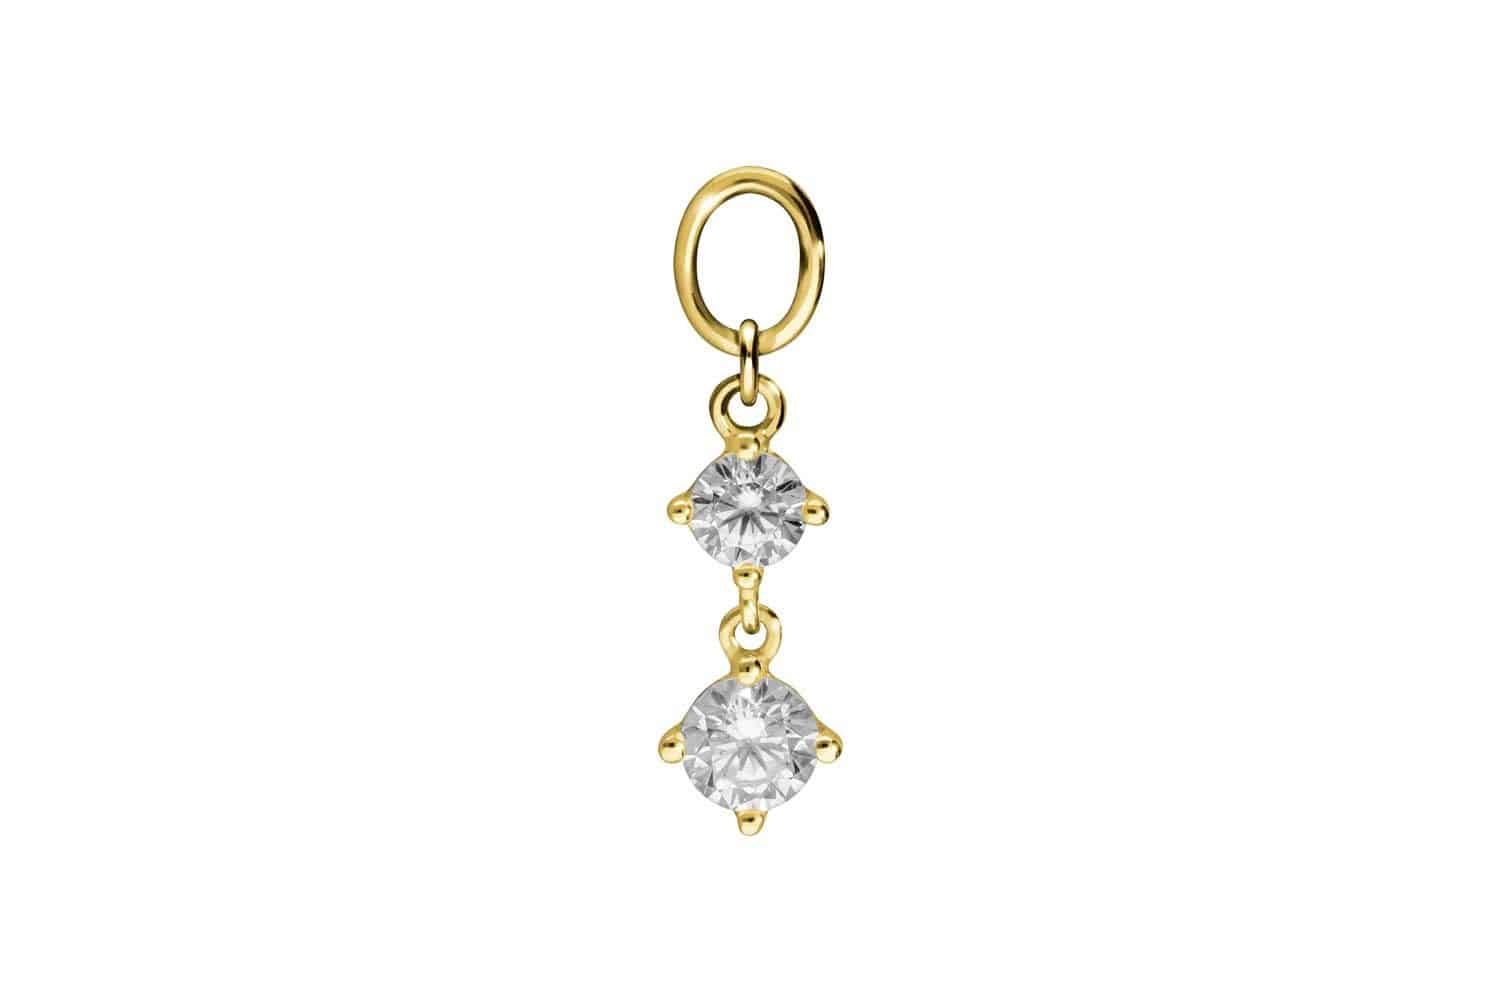 18 carat gold pendant for clickers 2 SETTED CRYSTALS